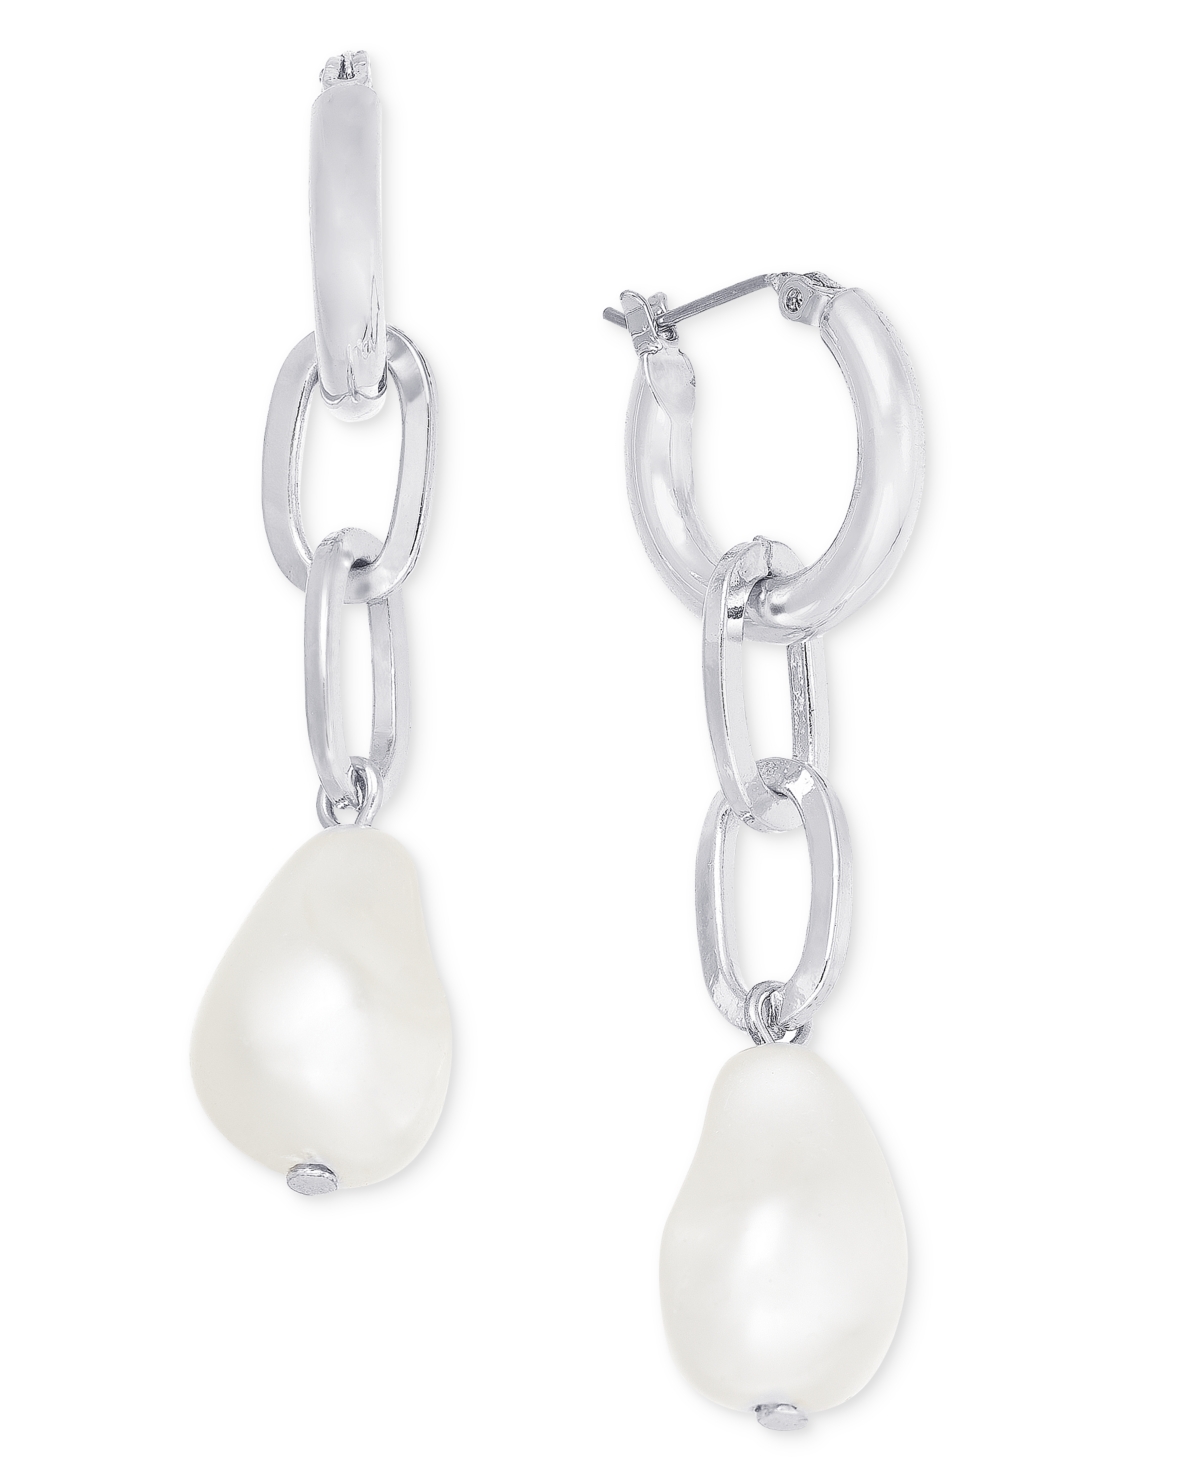 Imitation-Pearl Linear Chain Drop Earrings, Created for Macy's - Gold